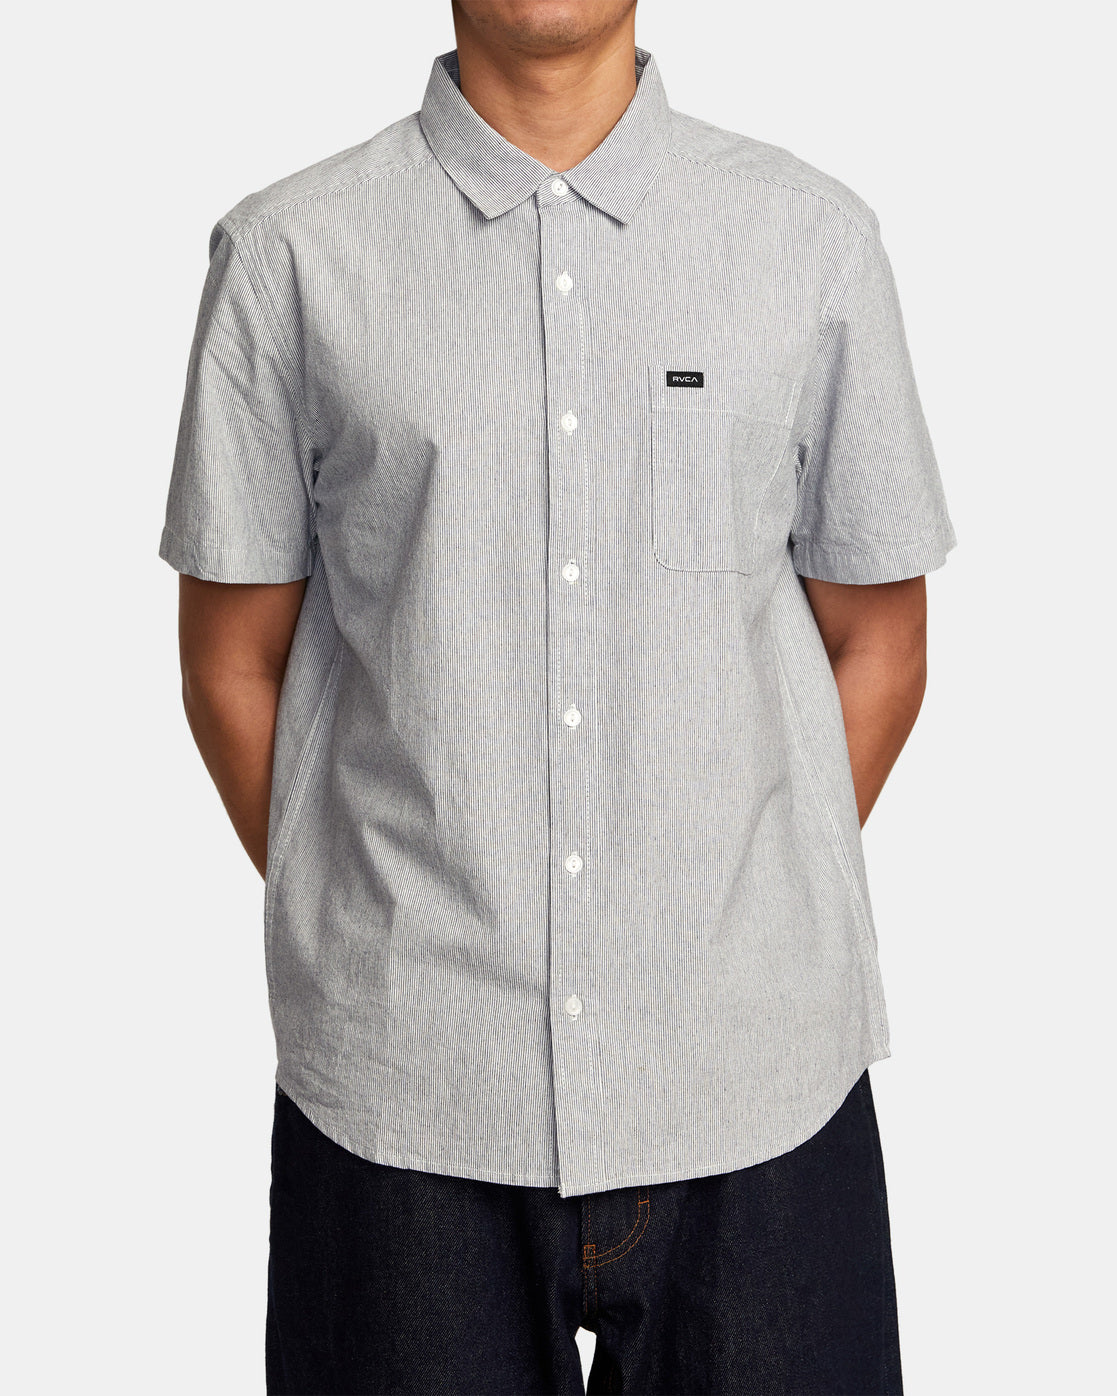 RVCA - Visions Stripe Short Sleeve Button Up